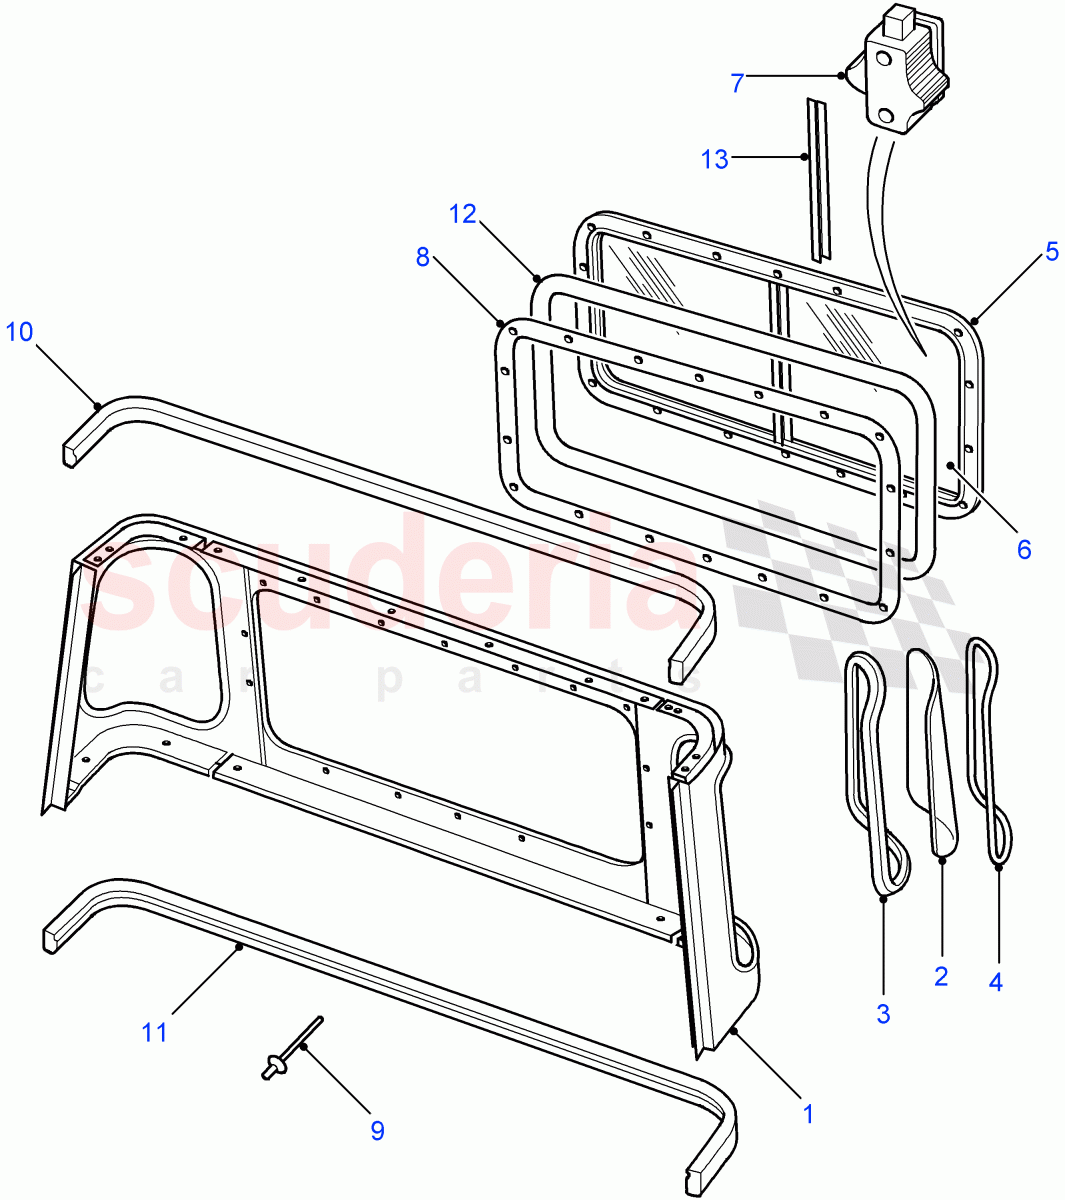 Cab Body Panel Rear(Chassis Cab,110" Wheelbase,High Capacity Pick Up,Pick Up,Crew Cab Pick Up,Chassis Crew Cab,130" Wheelbase,90" Wheelbase,Crew Cab HCPU)((V)FROM7A000001) of Land Rover Land Rover Defender (2007-2016)